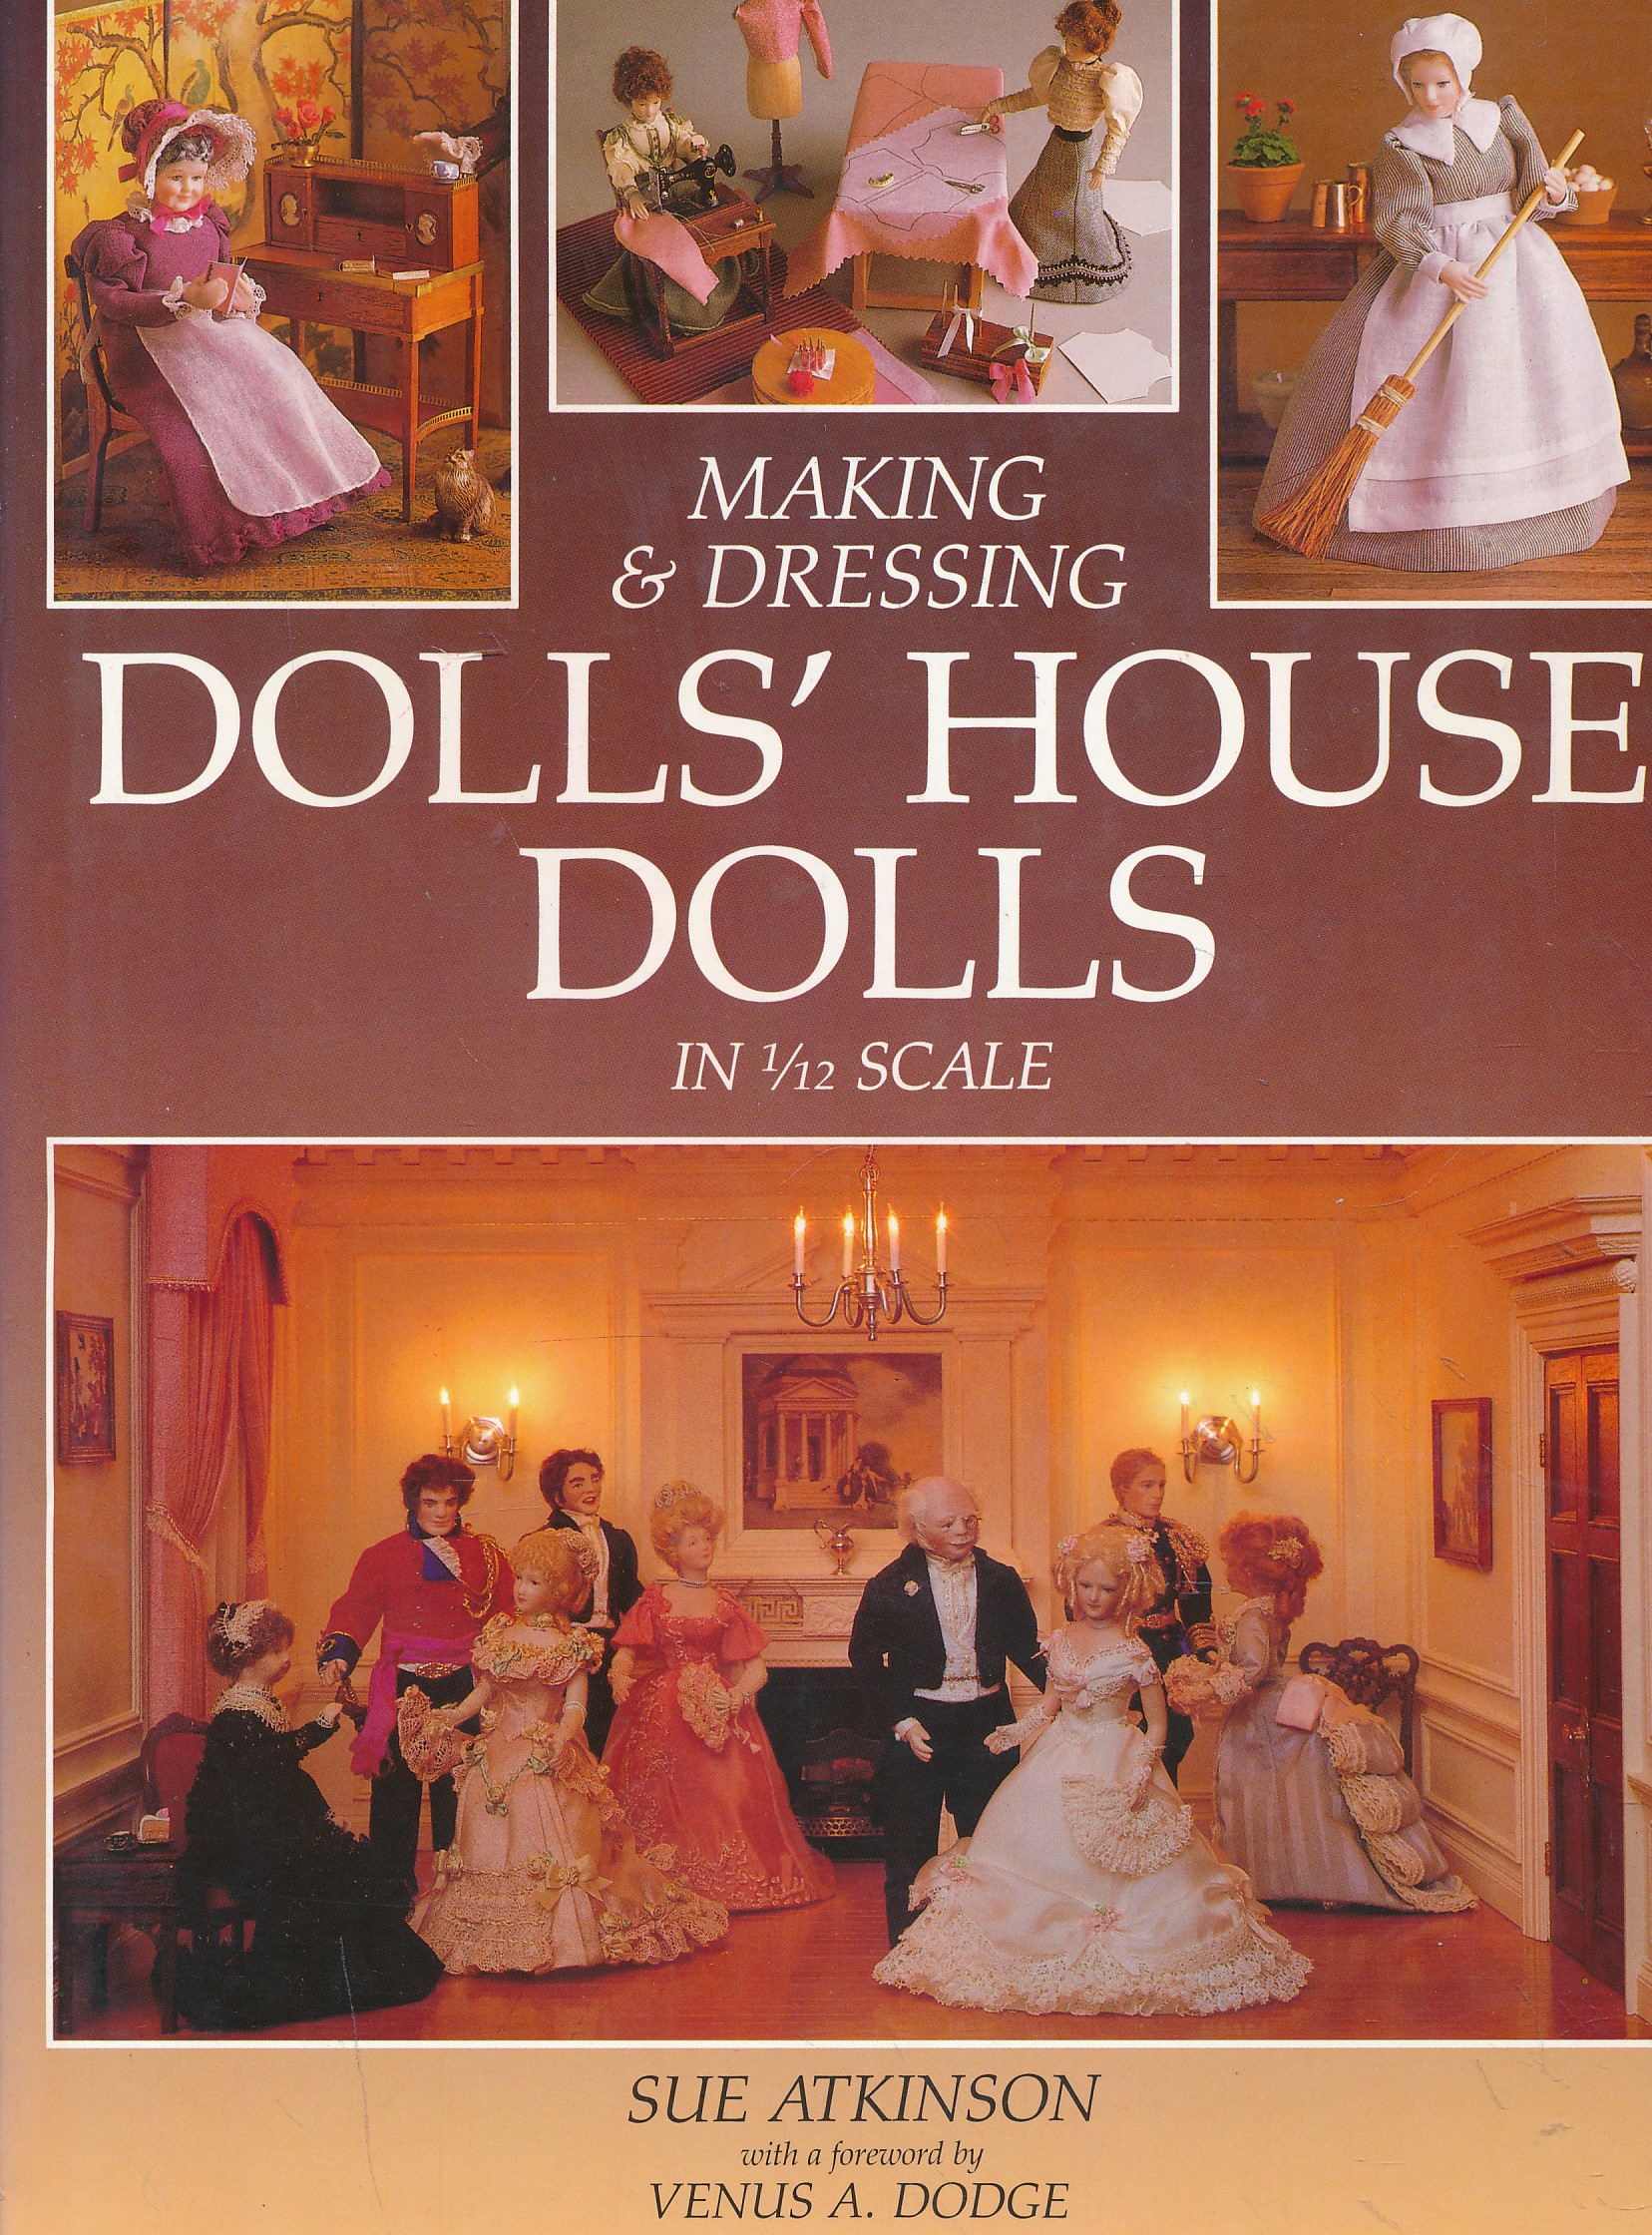 Making and Dressing Dolls' Houses in 1/12 Scale